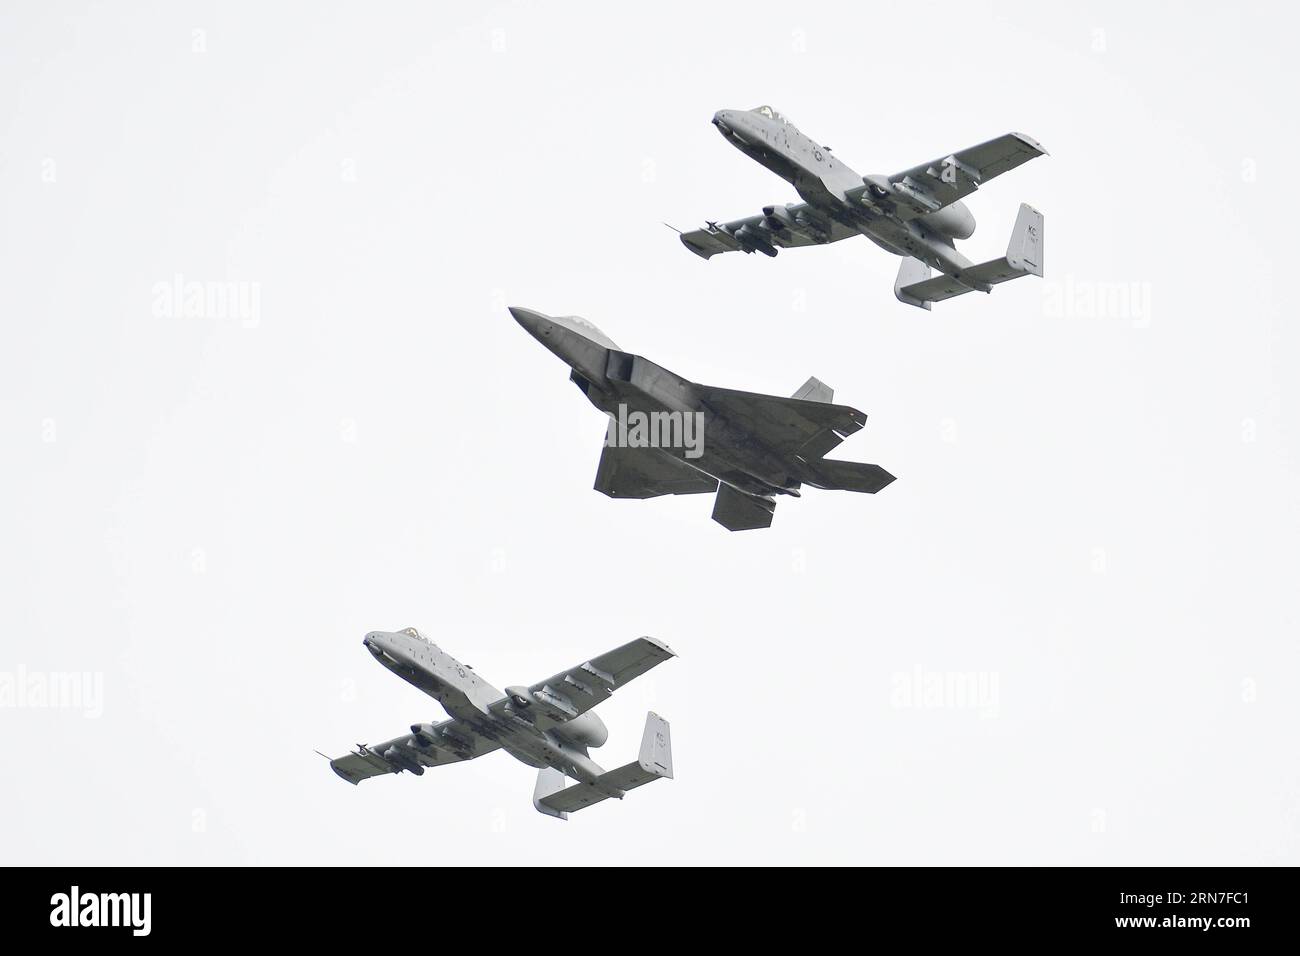 (150904) -- AMARI, Sept. 4, 2015 -- Two A-10 and one F-22 aircrafts fly over the Amari airbase in Estonia on Sept. 4, 2015. U.S. Air Forces Europe and Air Forces Africa Public Affairs made trial flights at Amari Air Base, Estonia, a reinforcement of the increased flying operations in the Baltic and Europe, as well as Estonia s ability to support rotational deployments of U.S. Air Force aircraft.) ESTONIA-AMARI-TRAIL FLIGHT SergeixStepanov PUBLICATIONxNOTxINxCHN   150904 Amari Sept 4 2015 Two a 10 and One F 22 aircraft Fly Over The Amari Airbase in Estonia ON Sept 4 2015 U S Air Forces Europe a Stock Photo